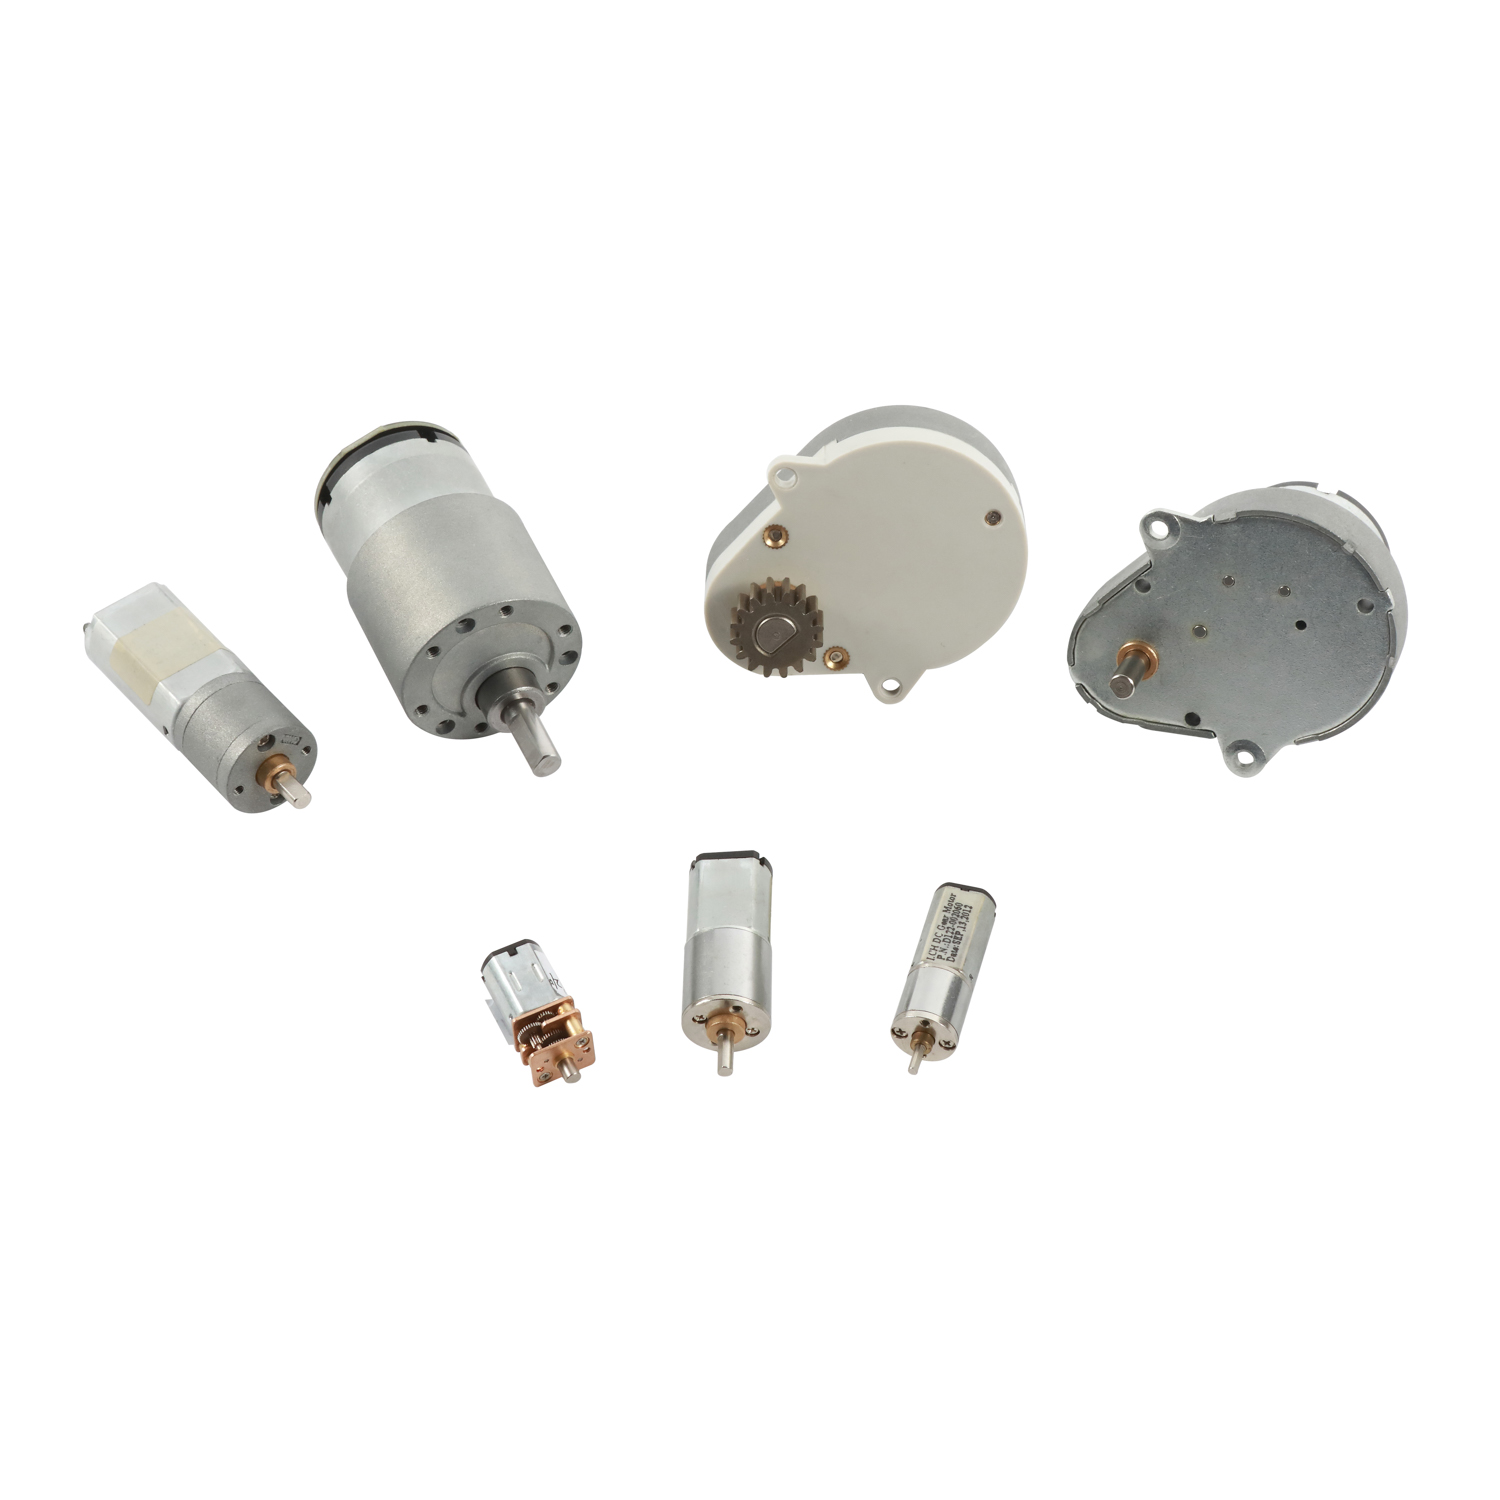 Low Speed DC Gear Motor With Remote